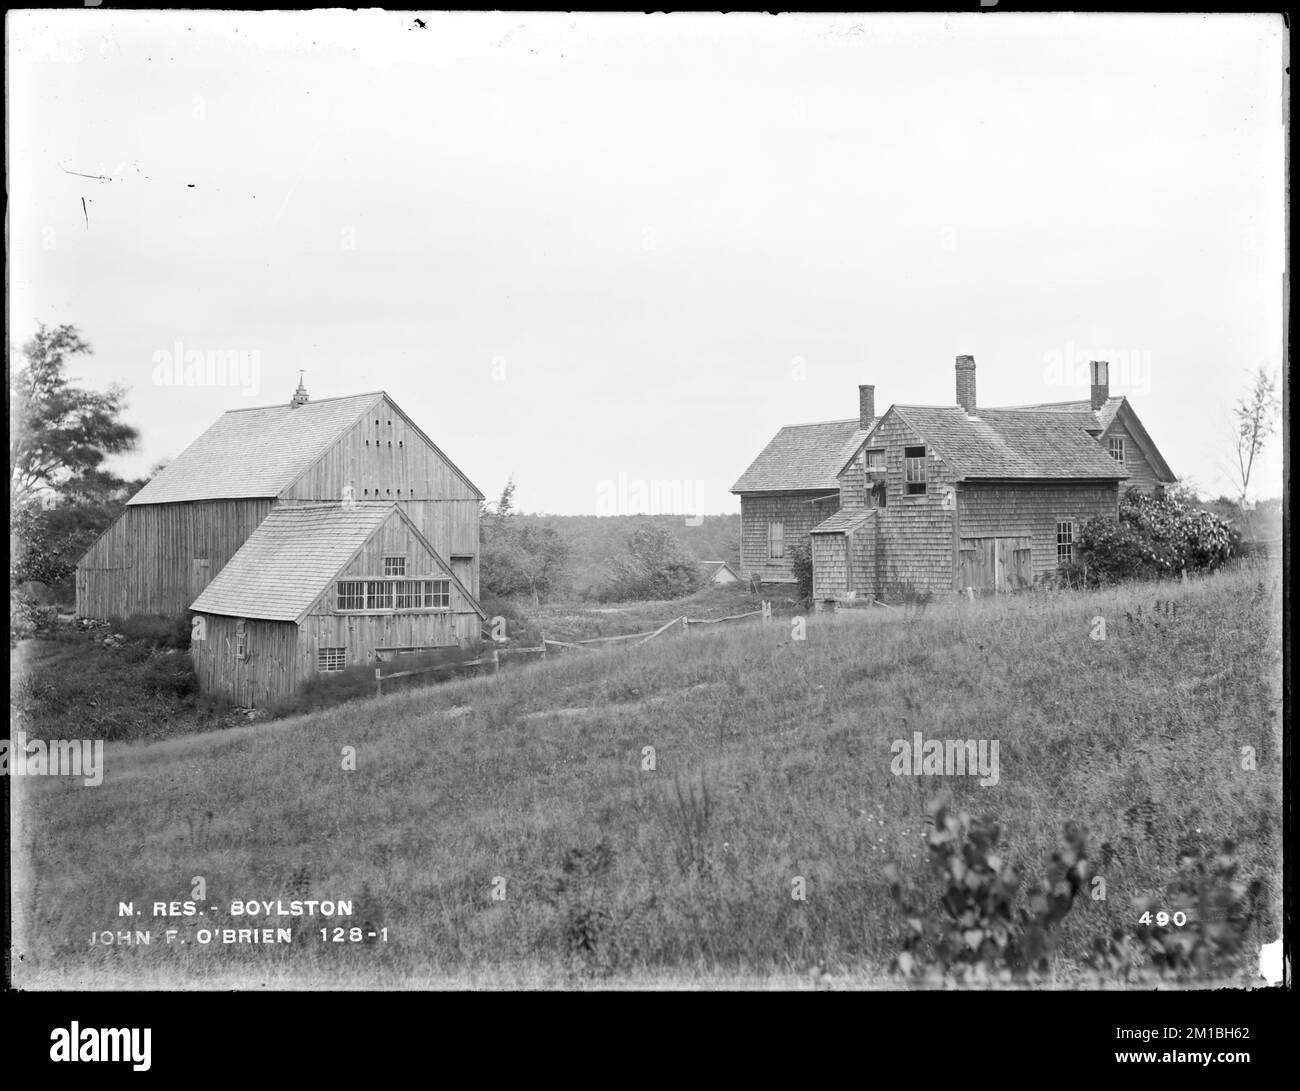 Wachusett Reservoir, John F. O'Brien's house and barn, from the southwest, Boylston, Mass., Sep. 3, 1896 , waterworks, reservoirs water distribution structures, real estate Stock Photo